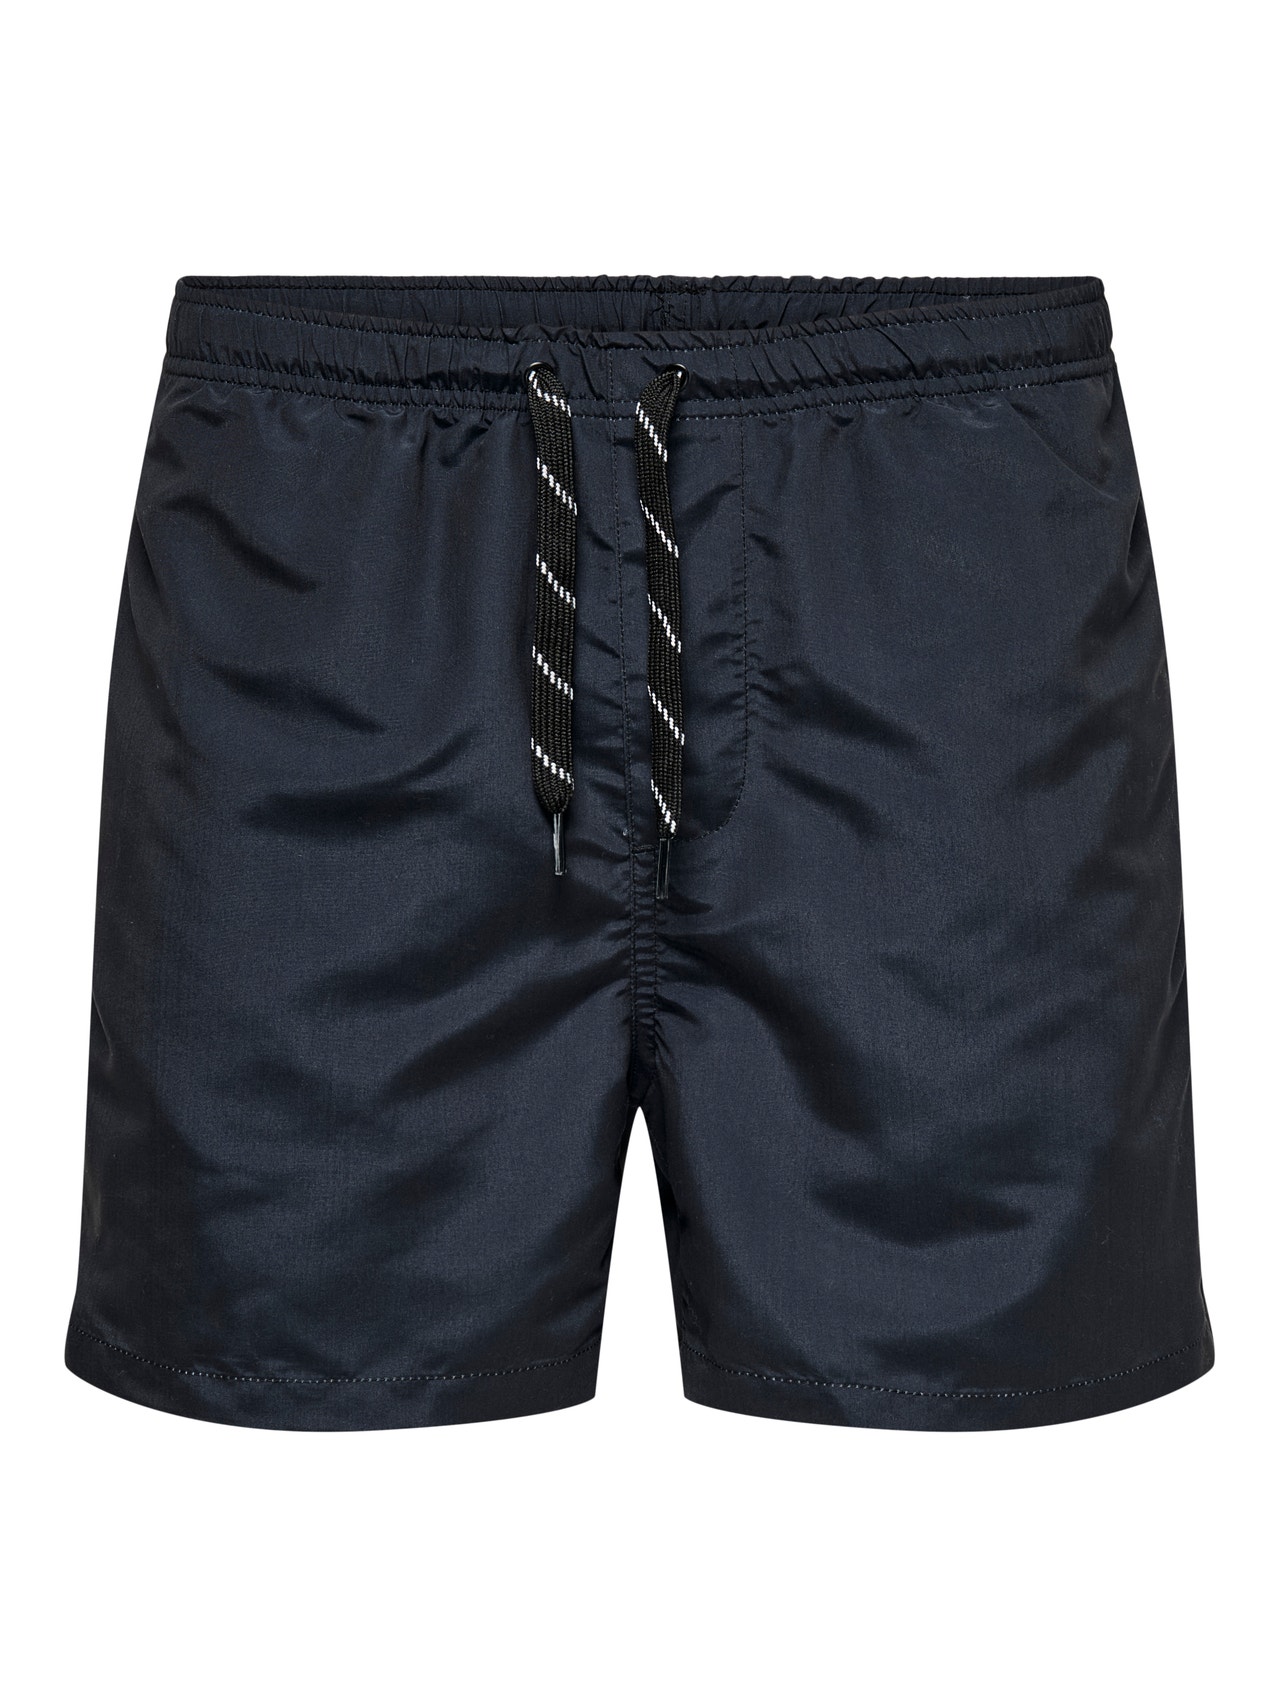 ONLY & SONS Bademode -Black - 22021832